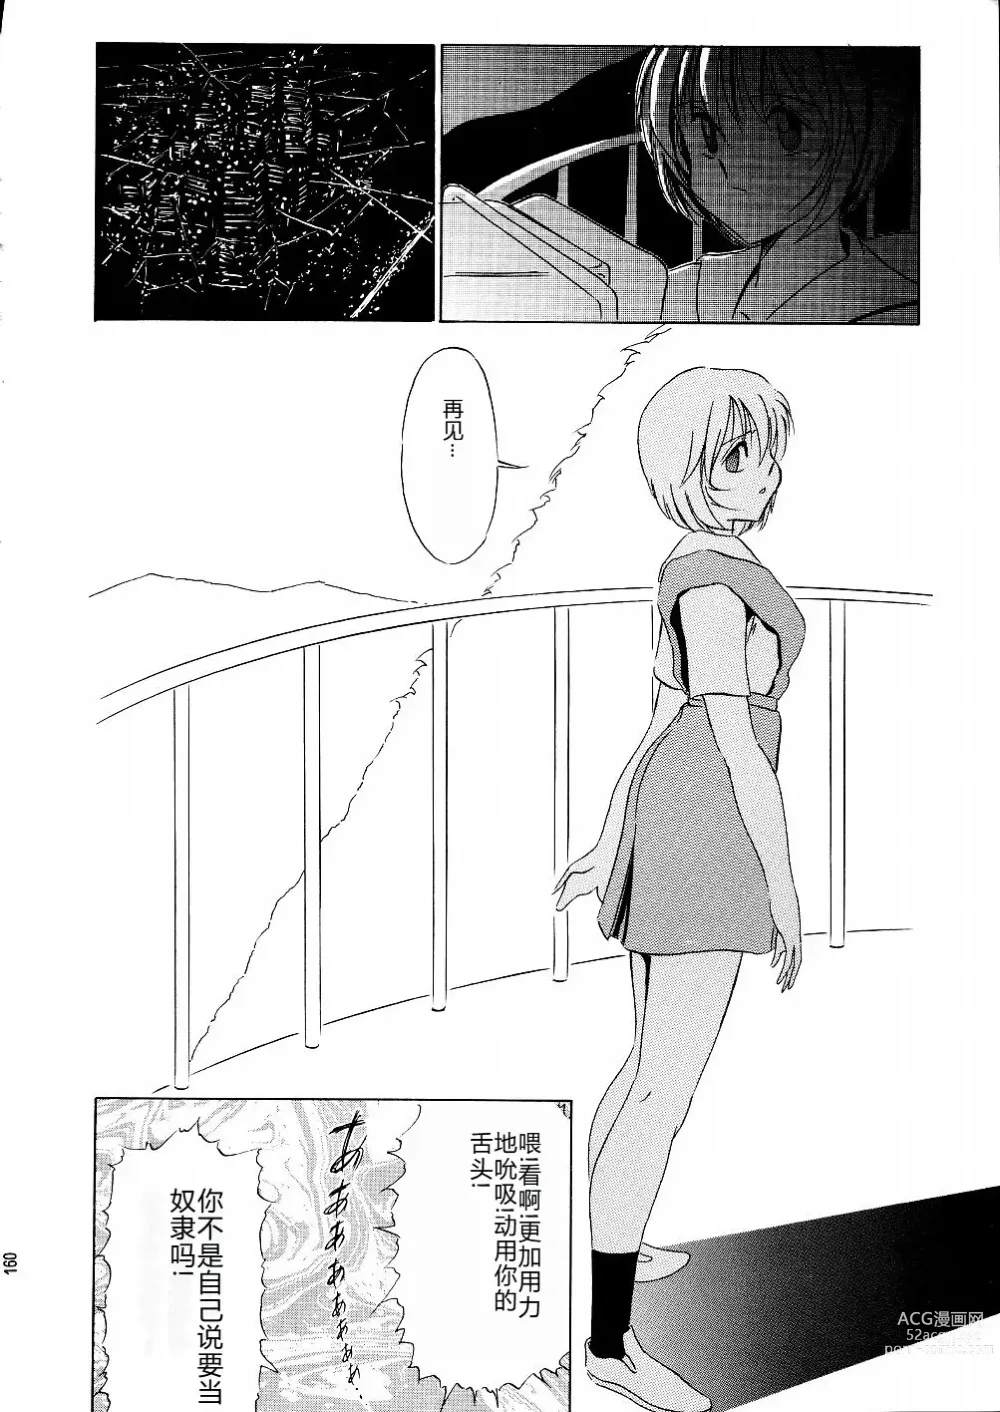 Page 160 of doujinshi Darkside Special 3